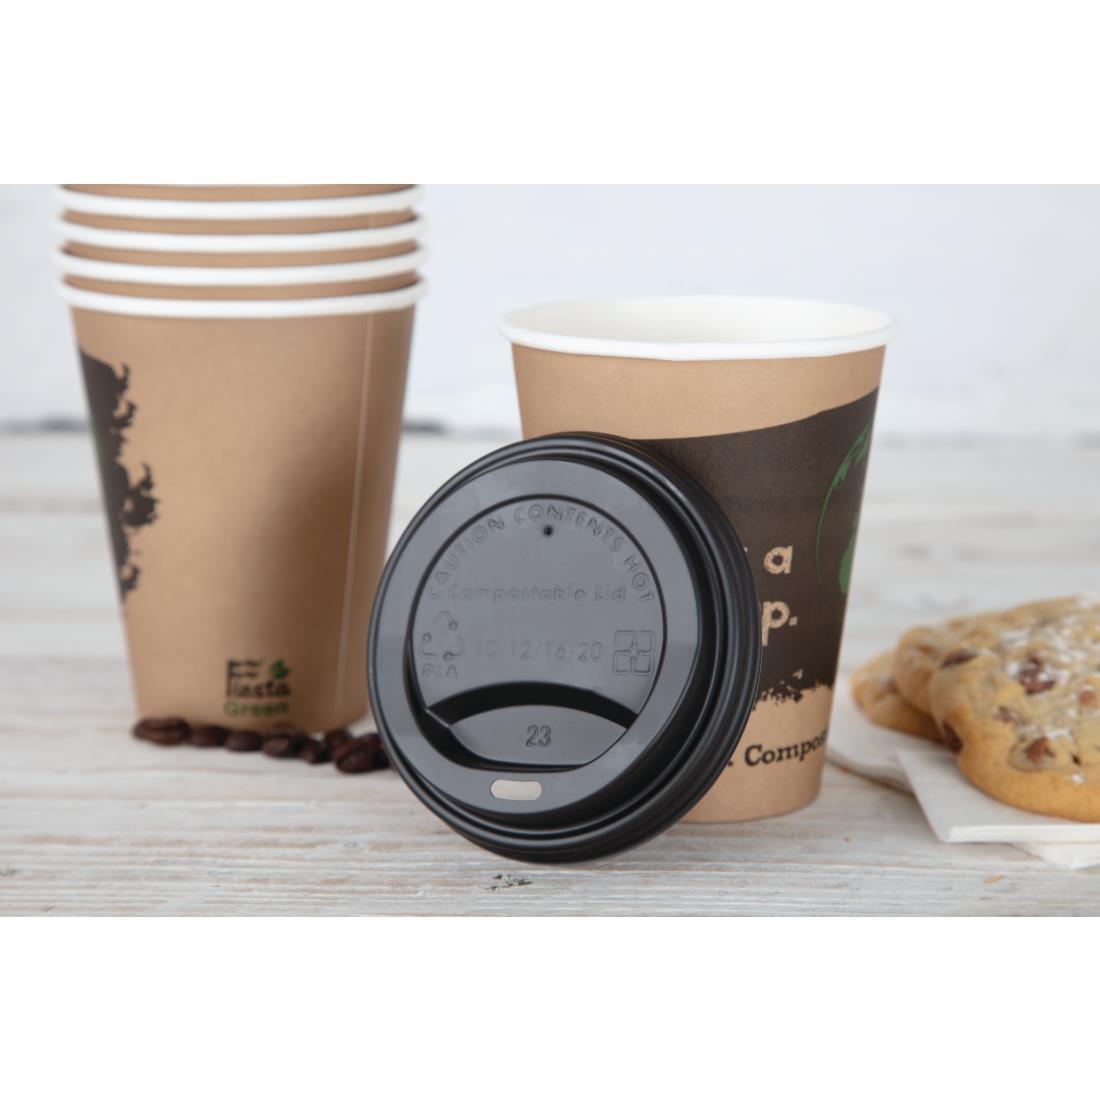 Fiesta Compostable Coffee Cup Lids 340ml / 12oz (Pack of 1000) - DS053  - 2